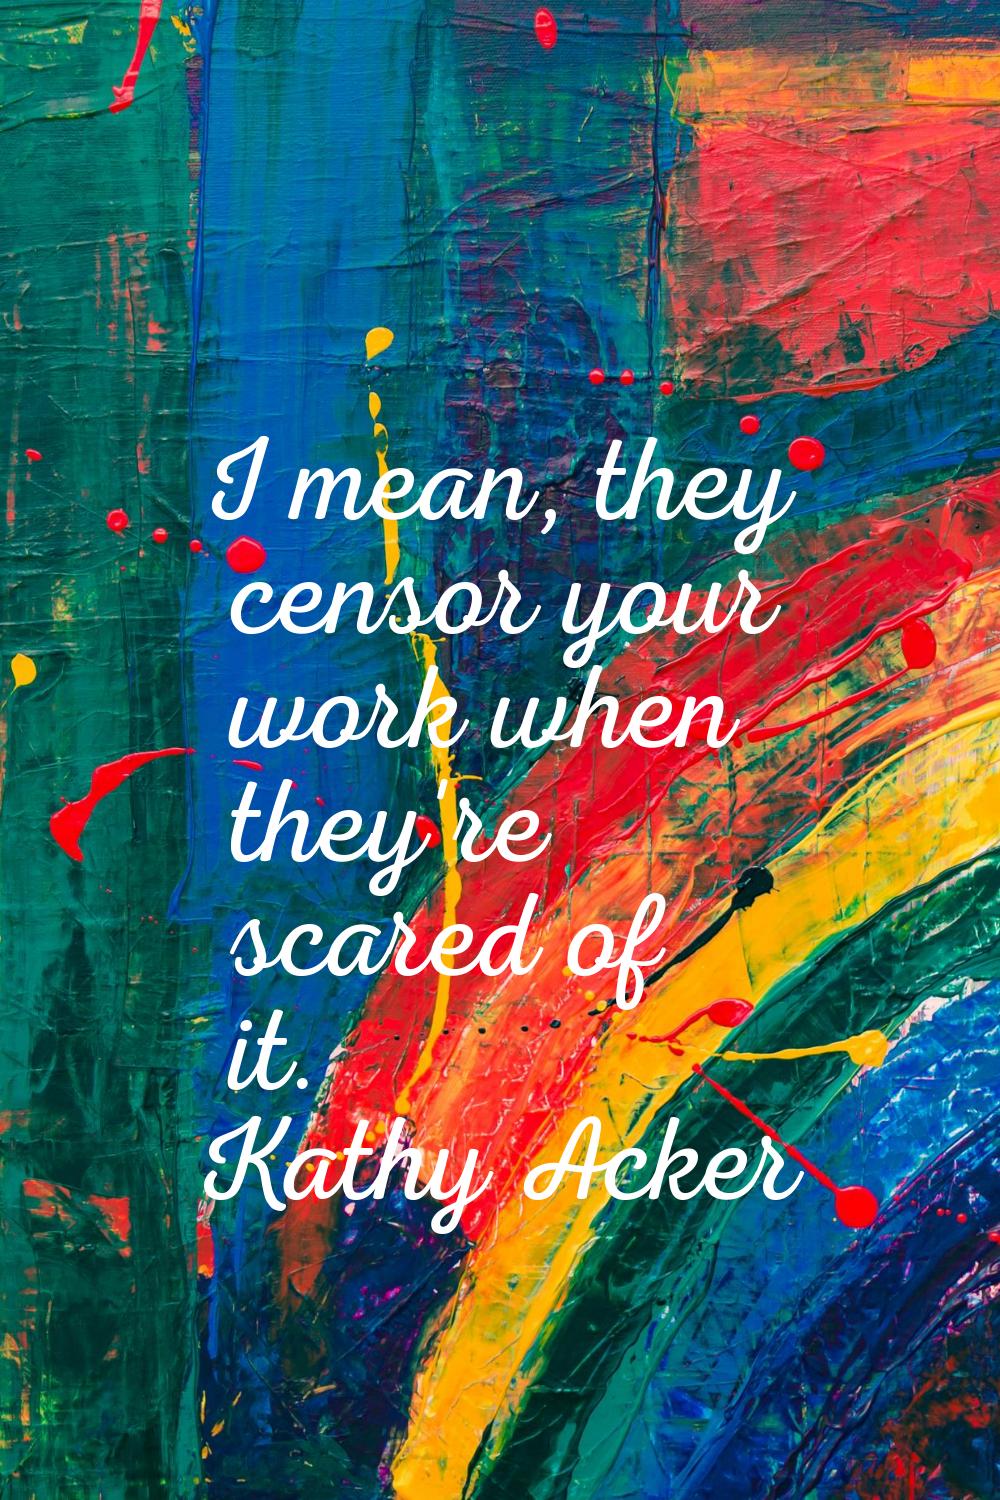 I mean, they censor your work when they're scared of it.